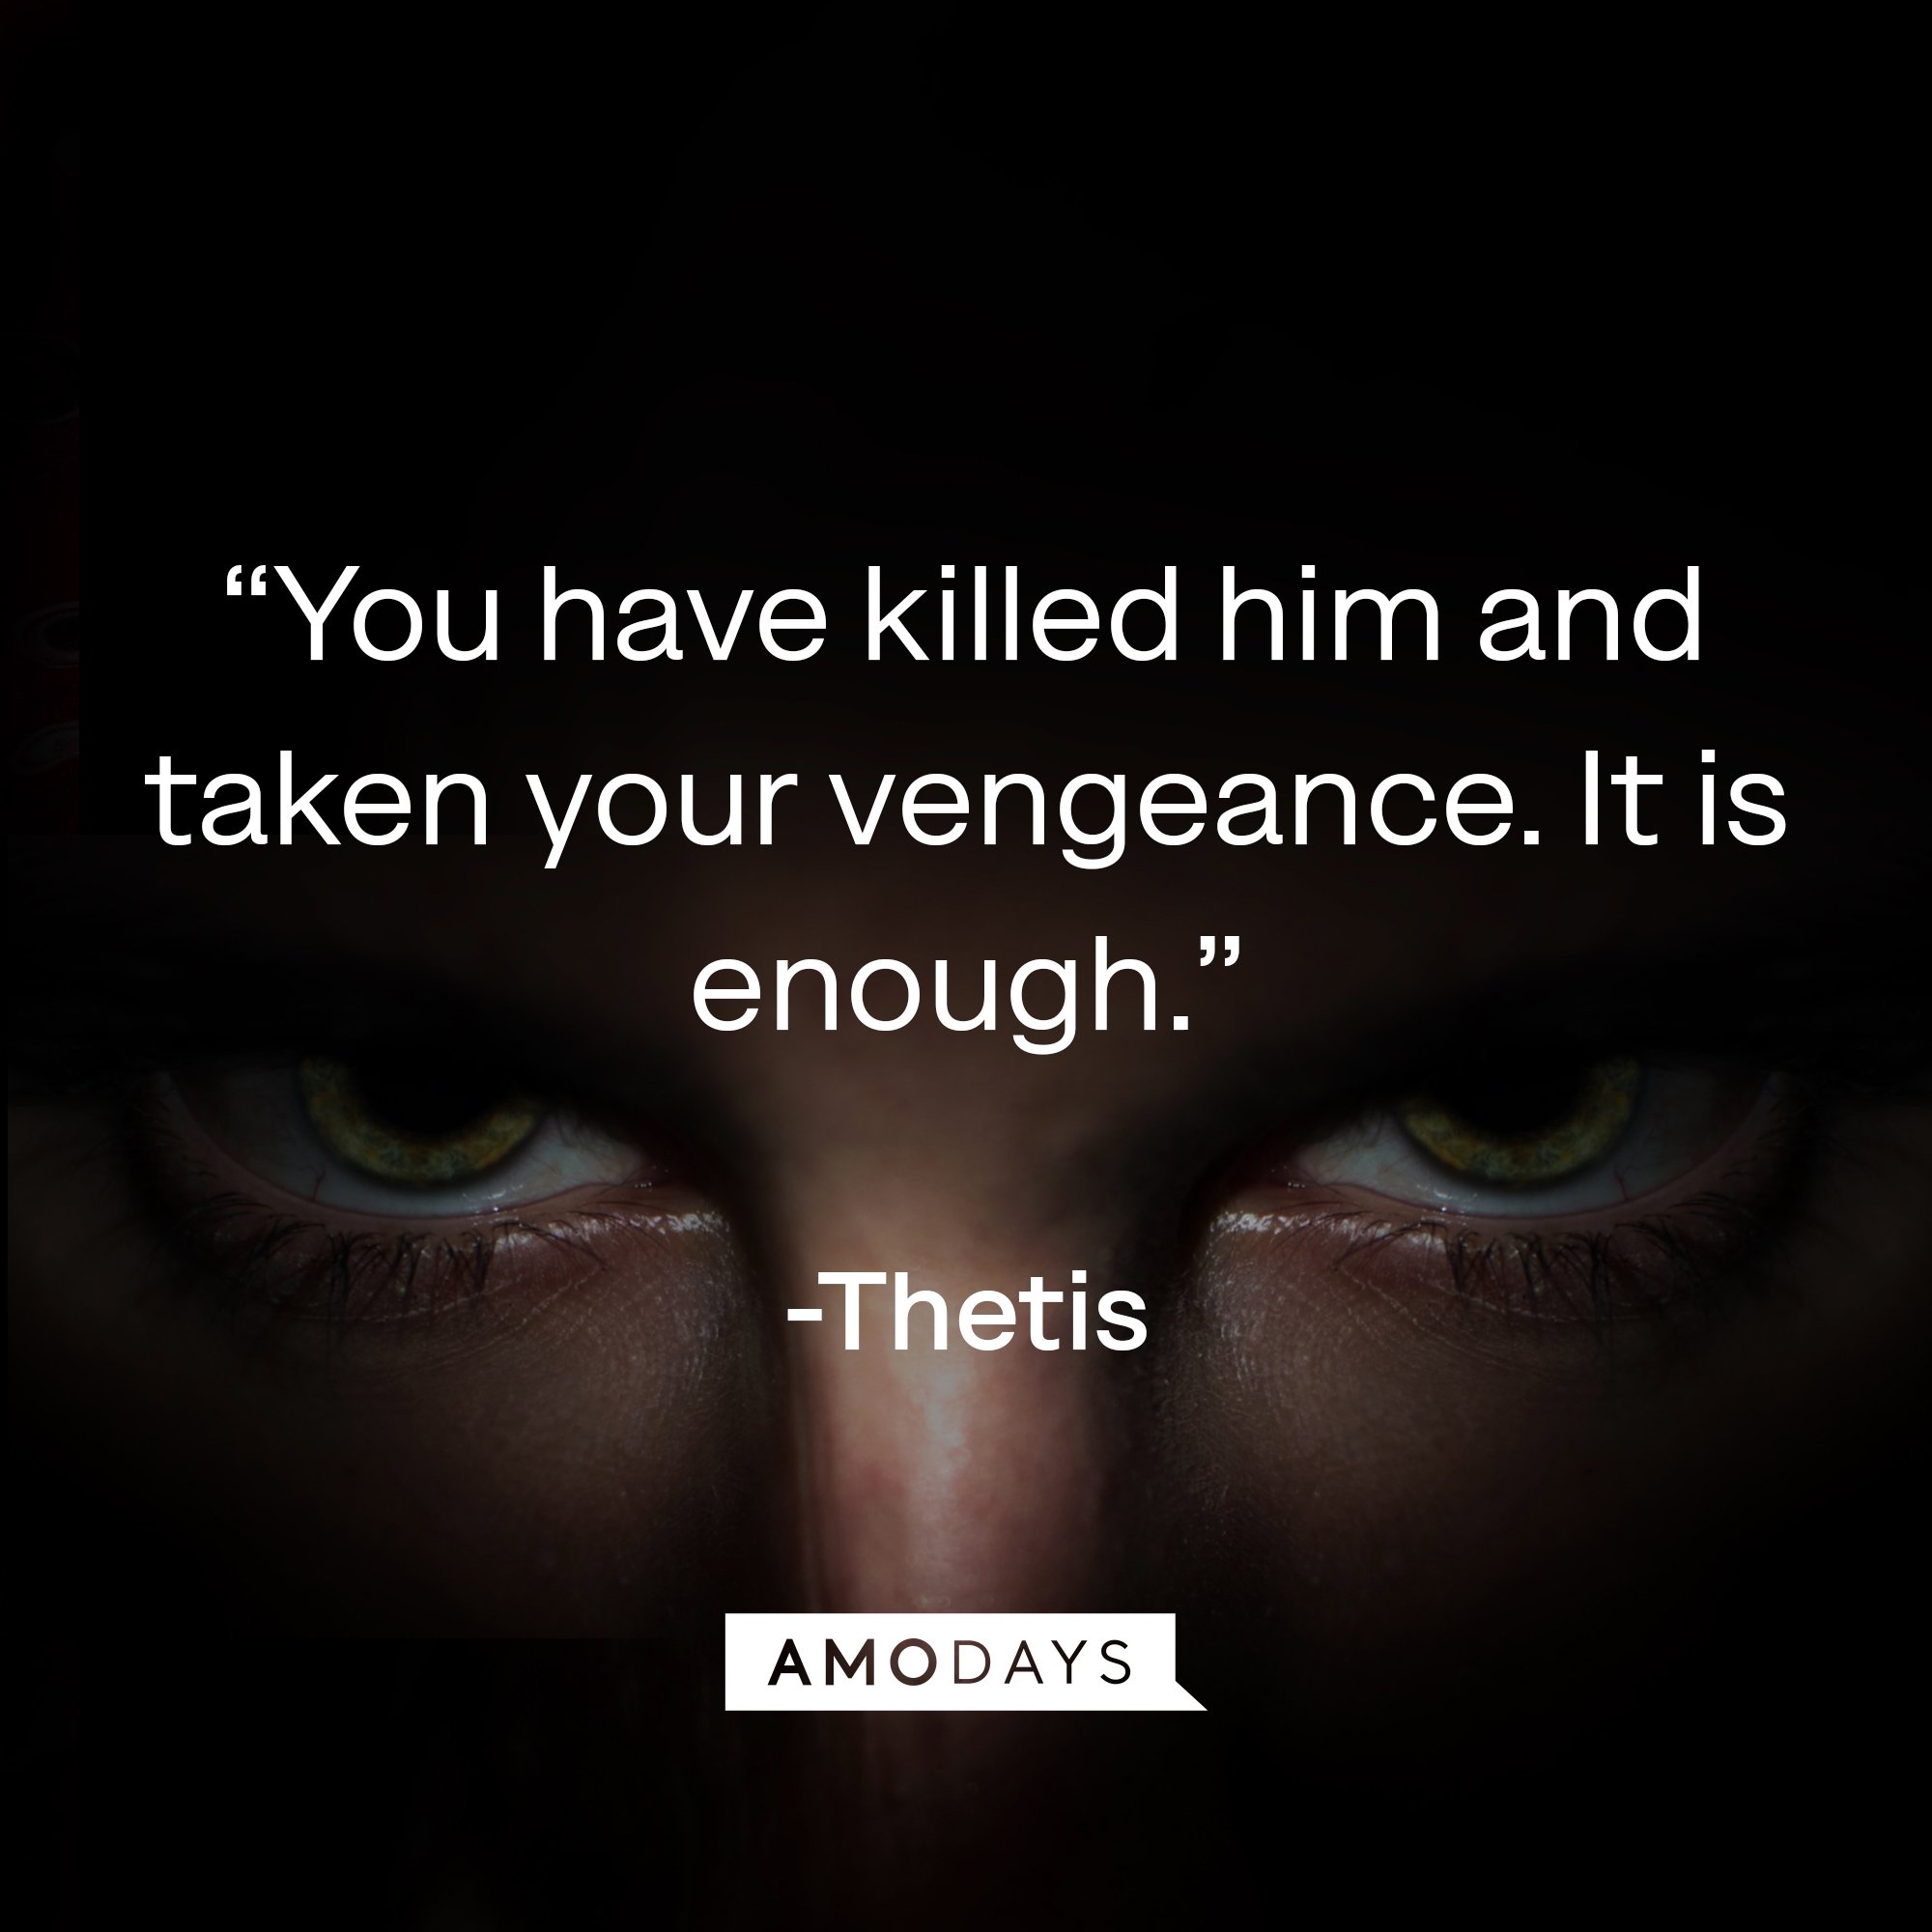 Thetis's quote: “You have killed him and taken your vengeance. It is enough.” | Image; AmoDays